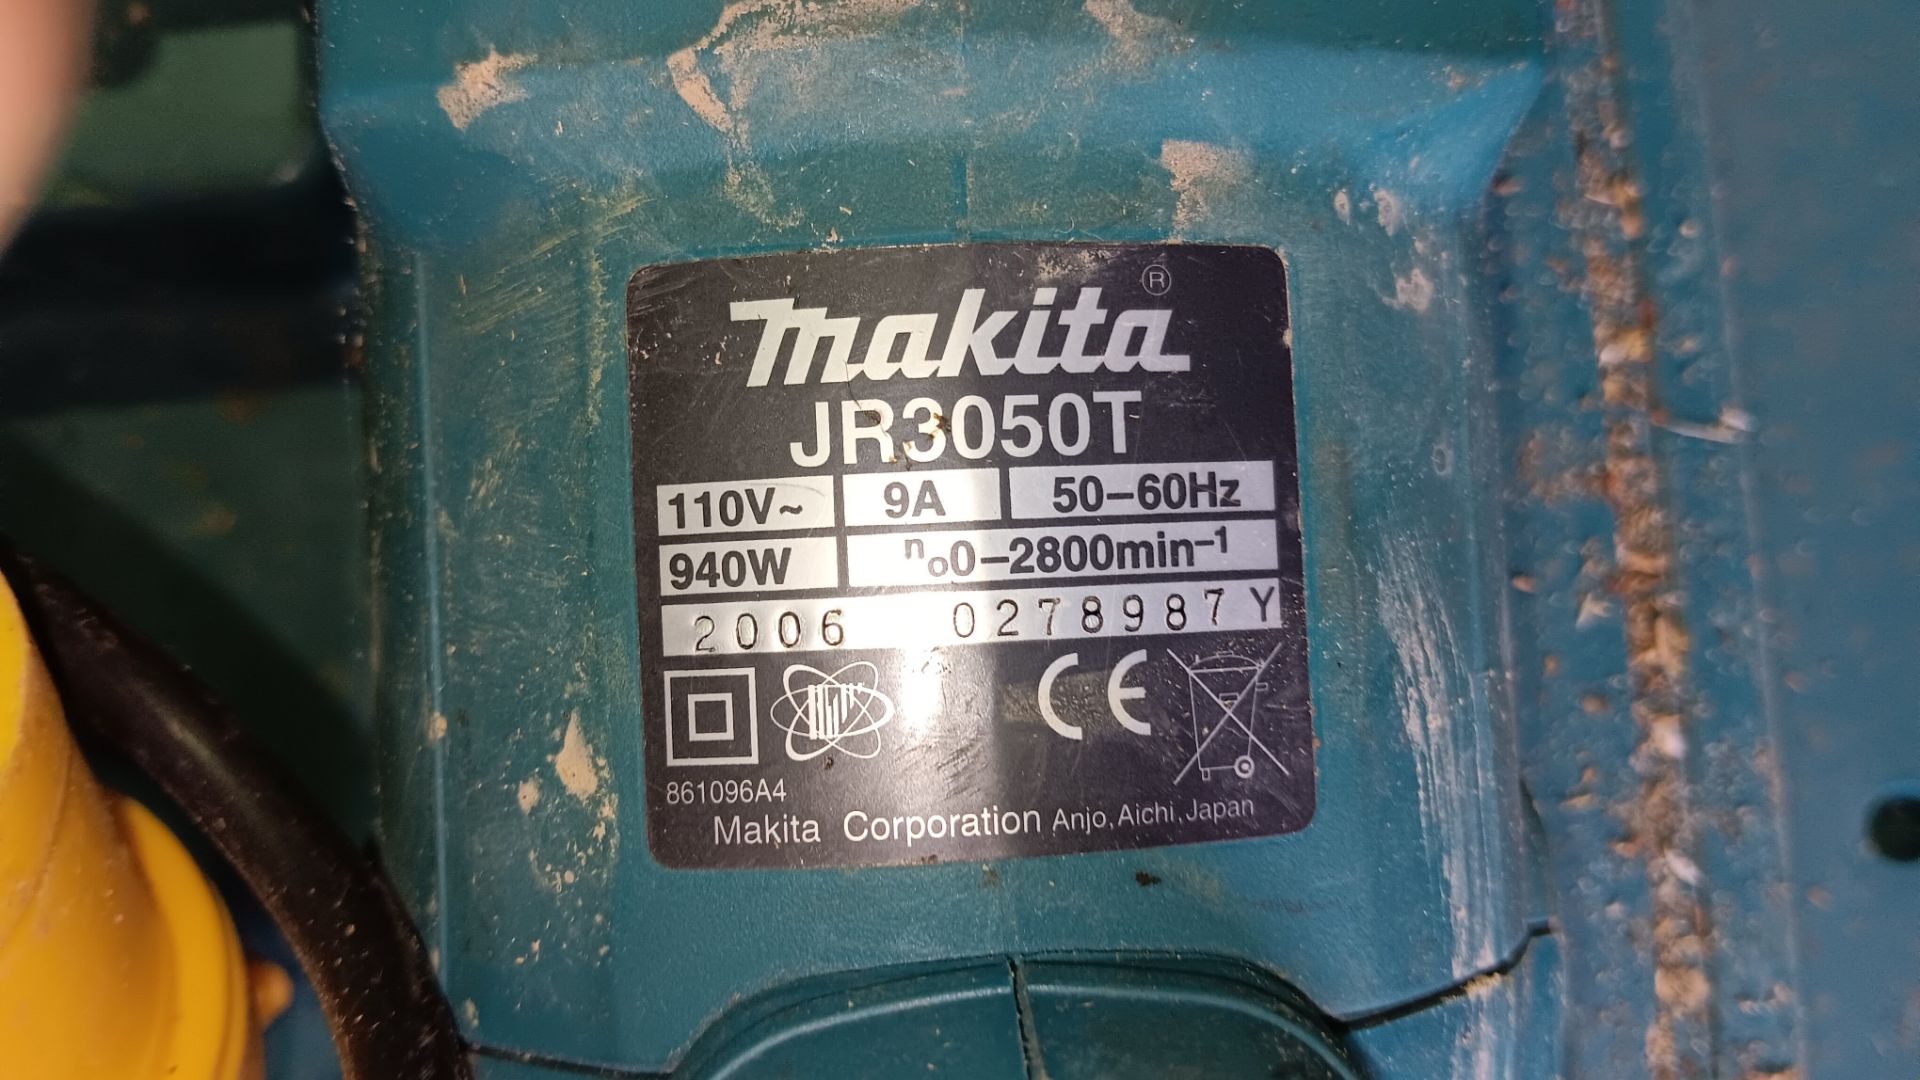 Makita JR3050T reciprocating saw with case ,110v, serial number 0278987Y (2006) - Bild 2 aus 2